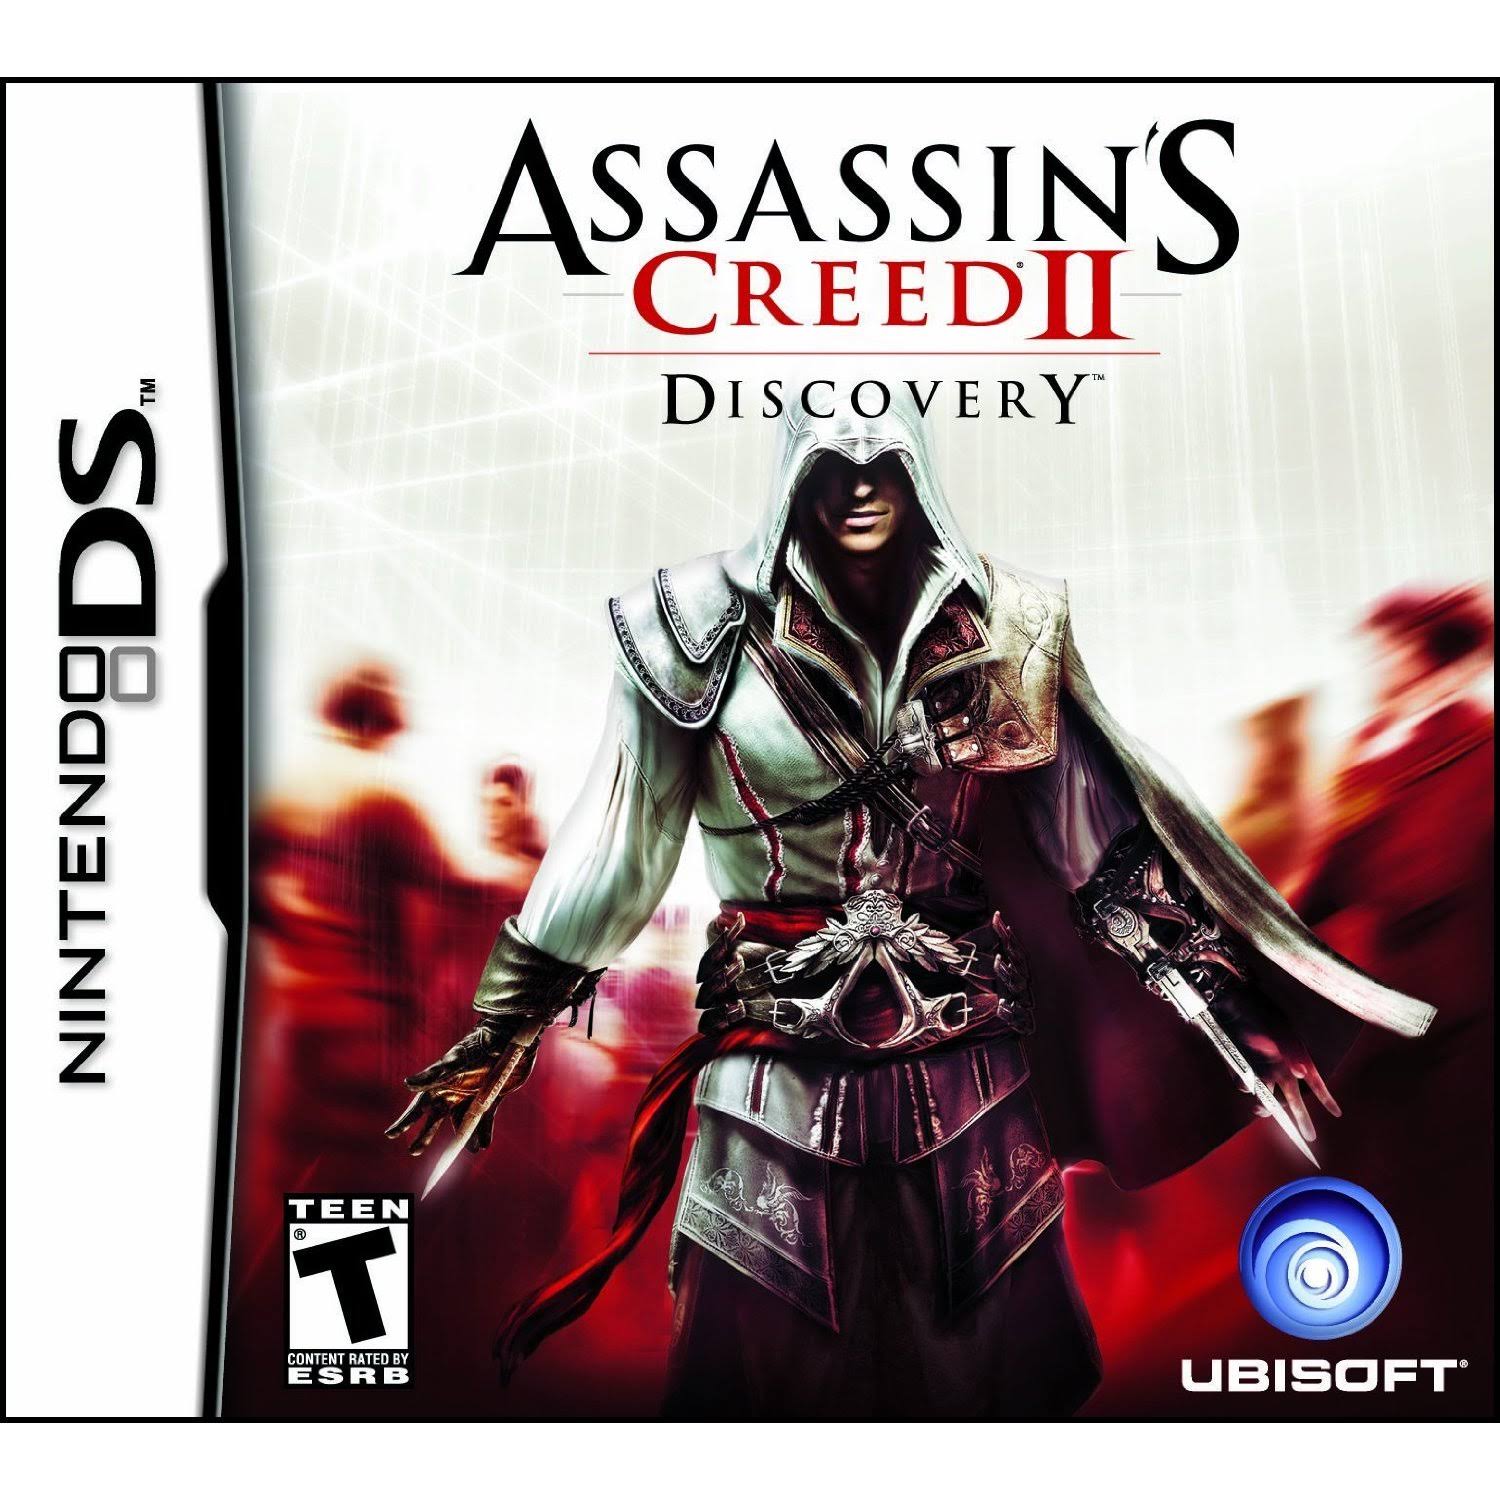 Assassin's Creed II: Discovery - Ds